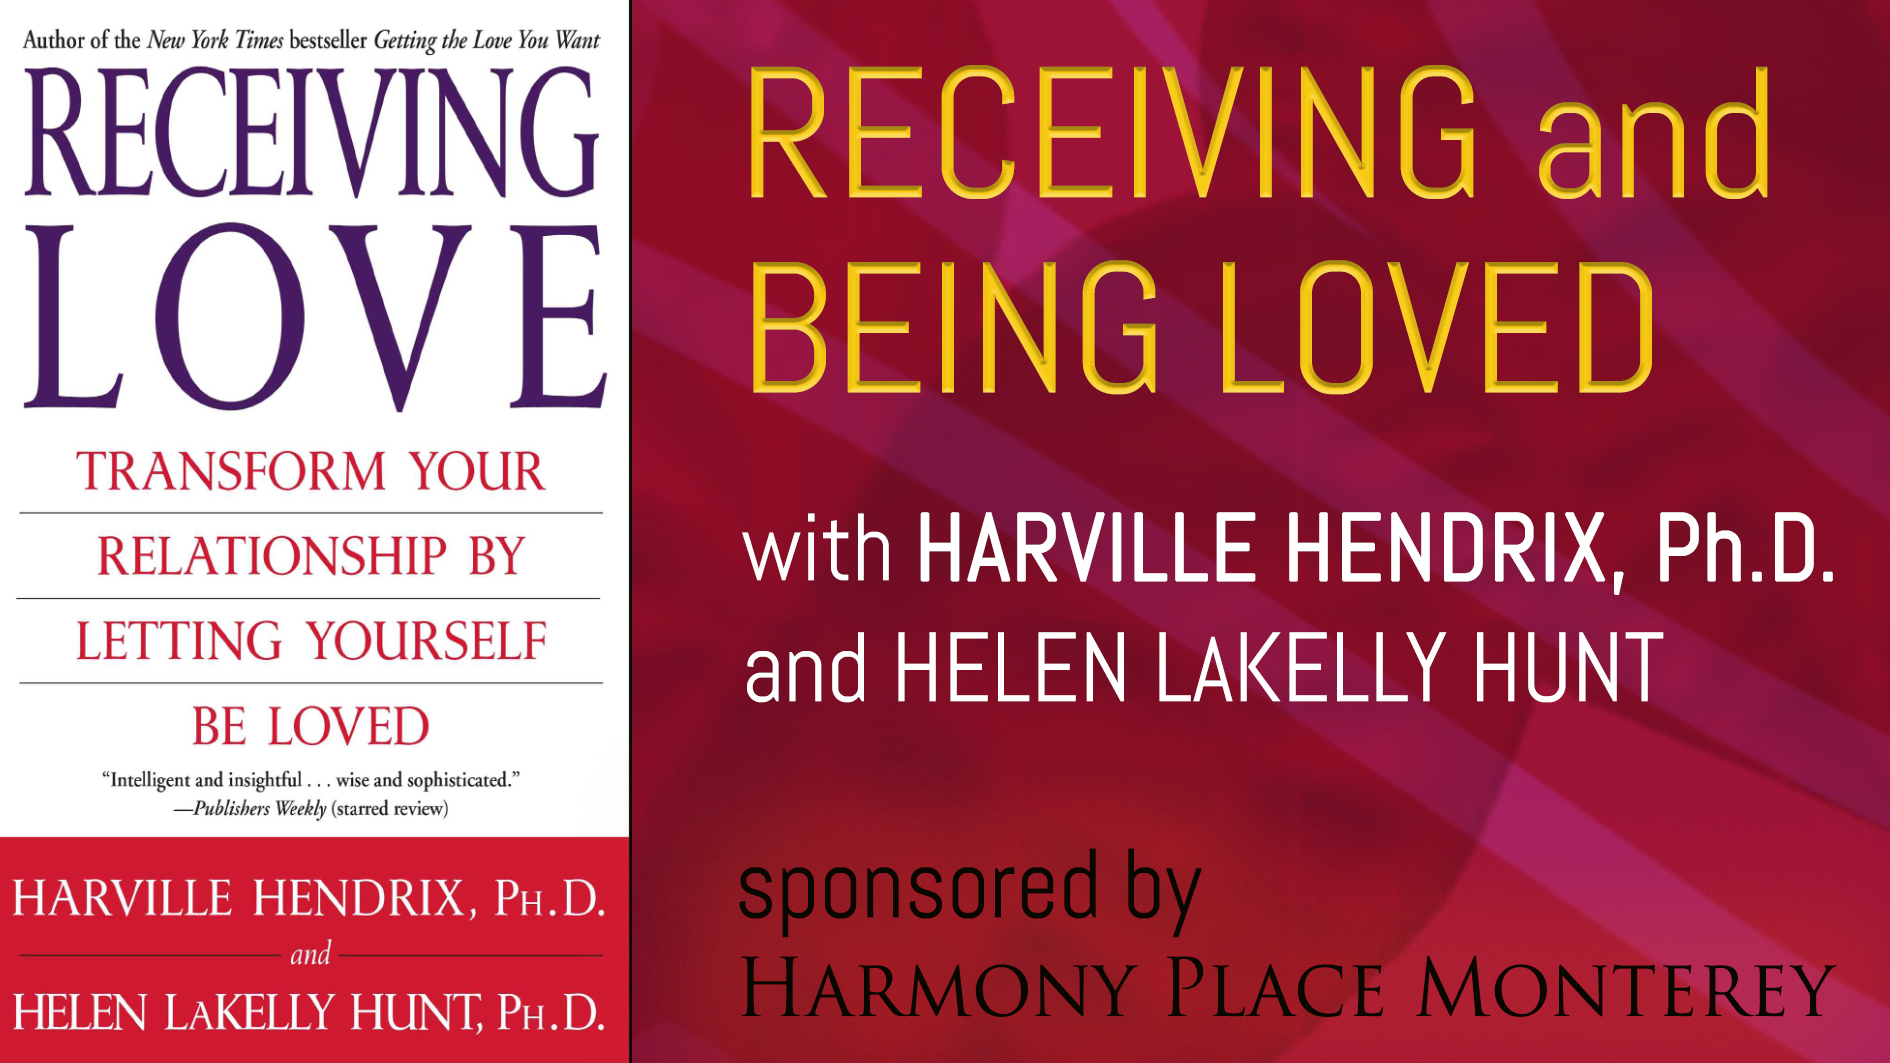 WORKSHOP VIDEO: Receiving Love and Being Loved: Transforming your Intimate Relationship